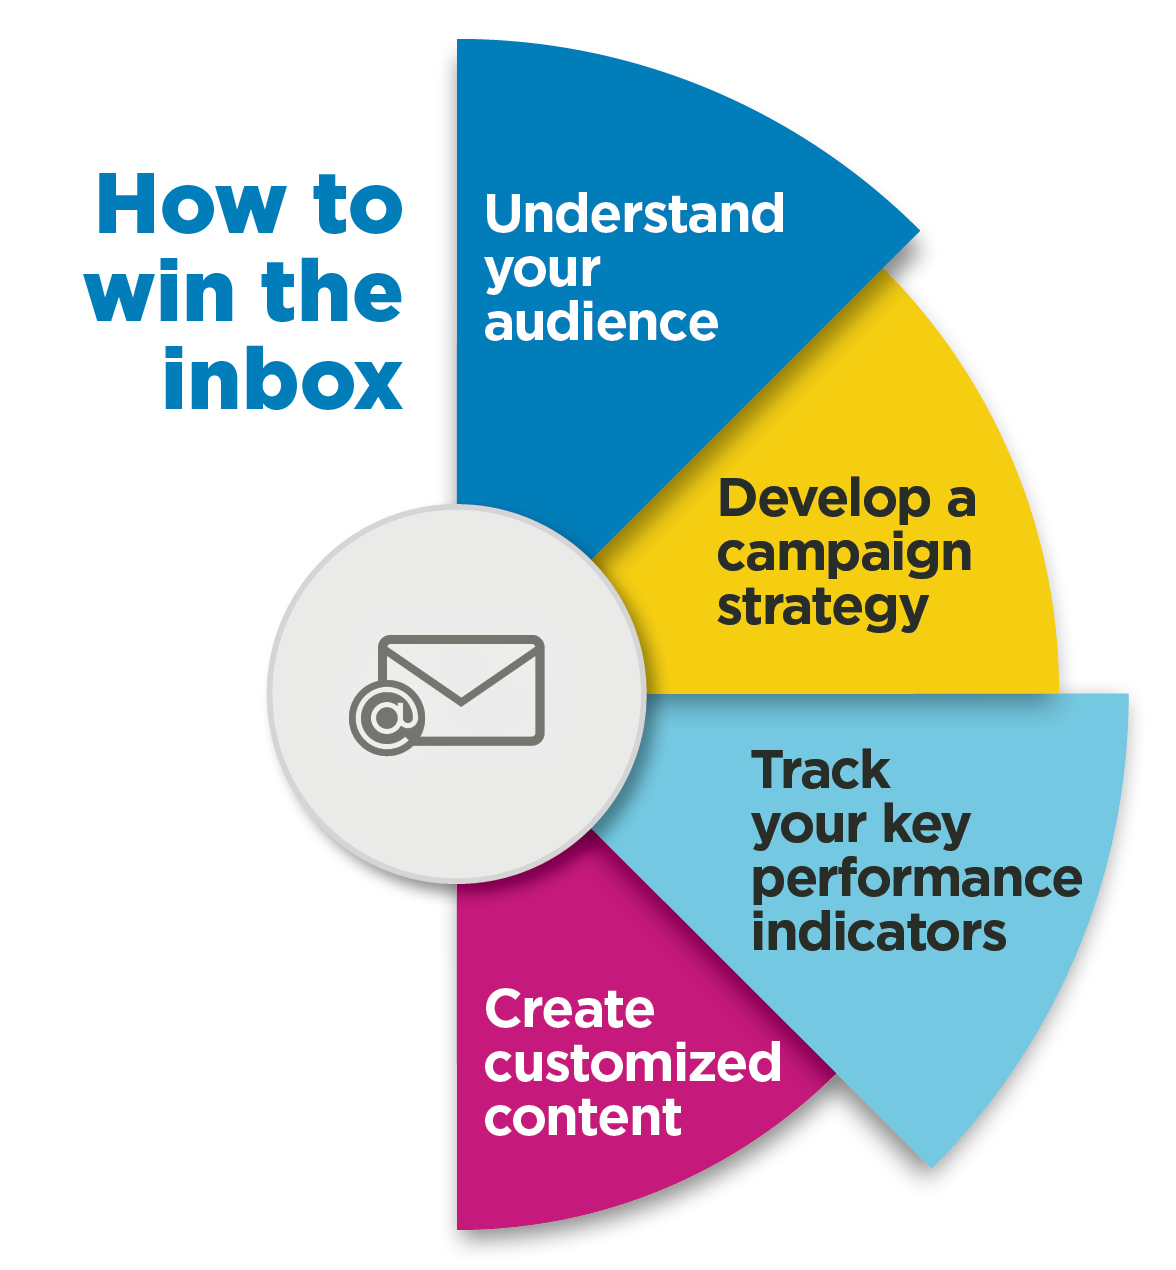 WG Content's process for email marketing